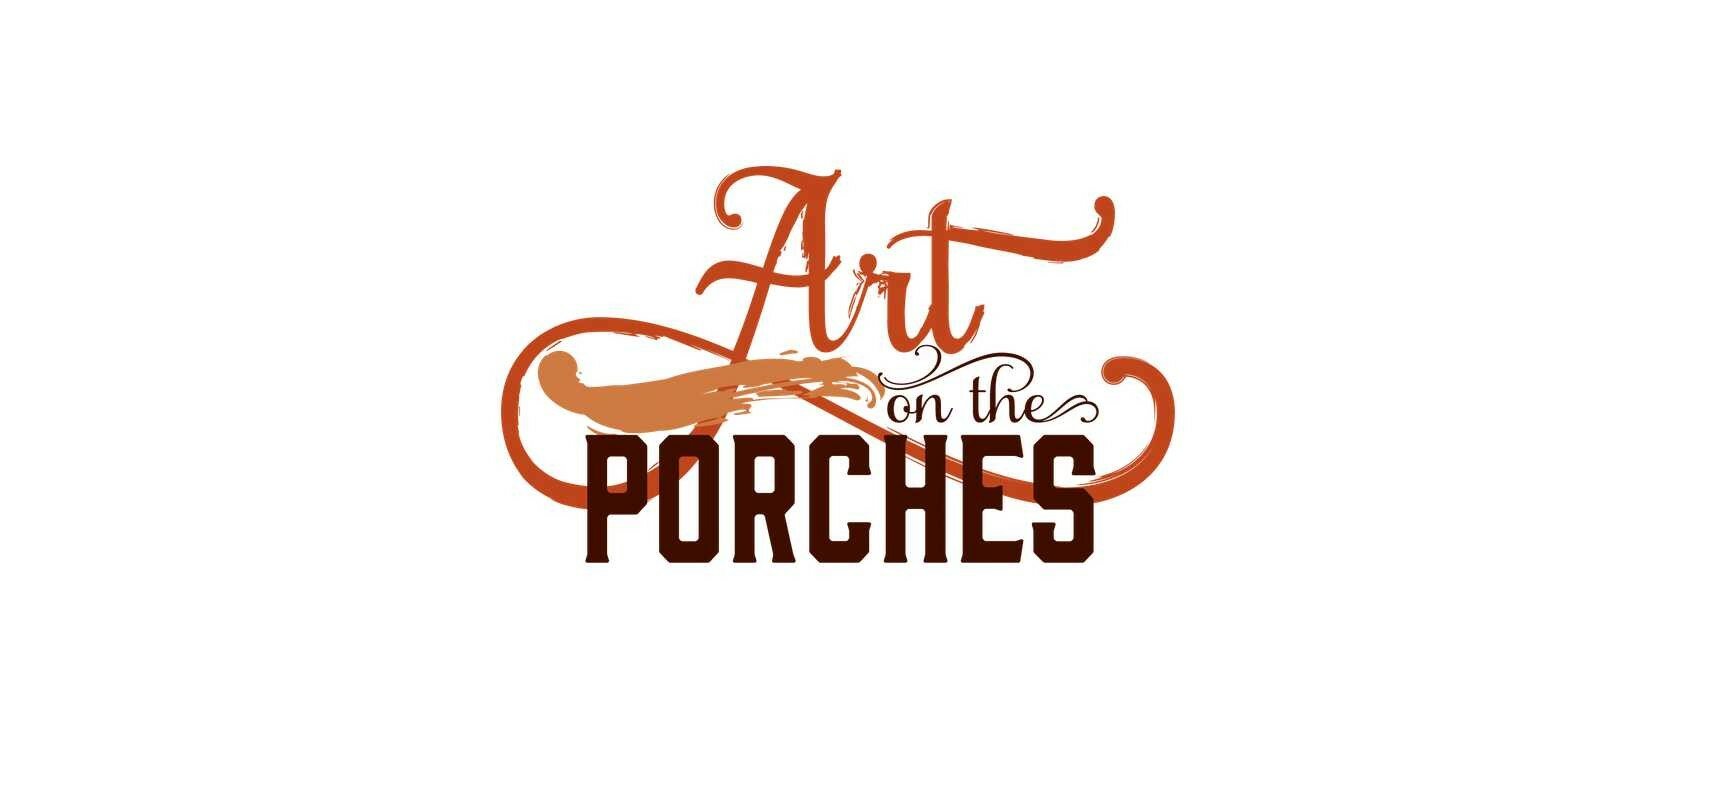 Art On The Porches Poster Contest 2014